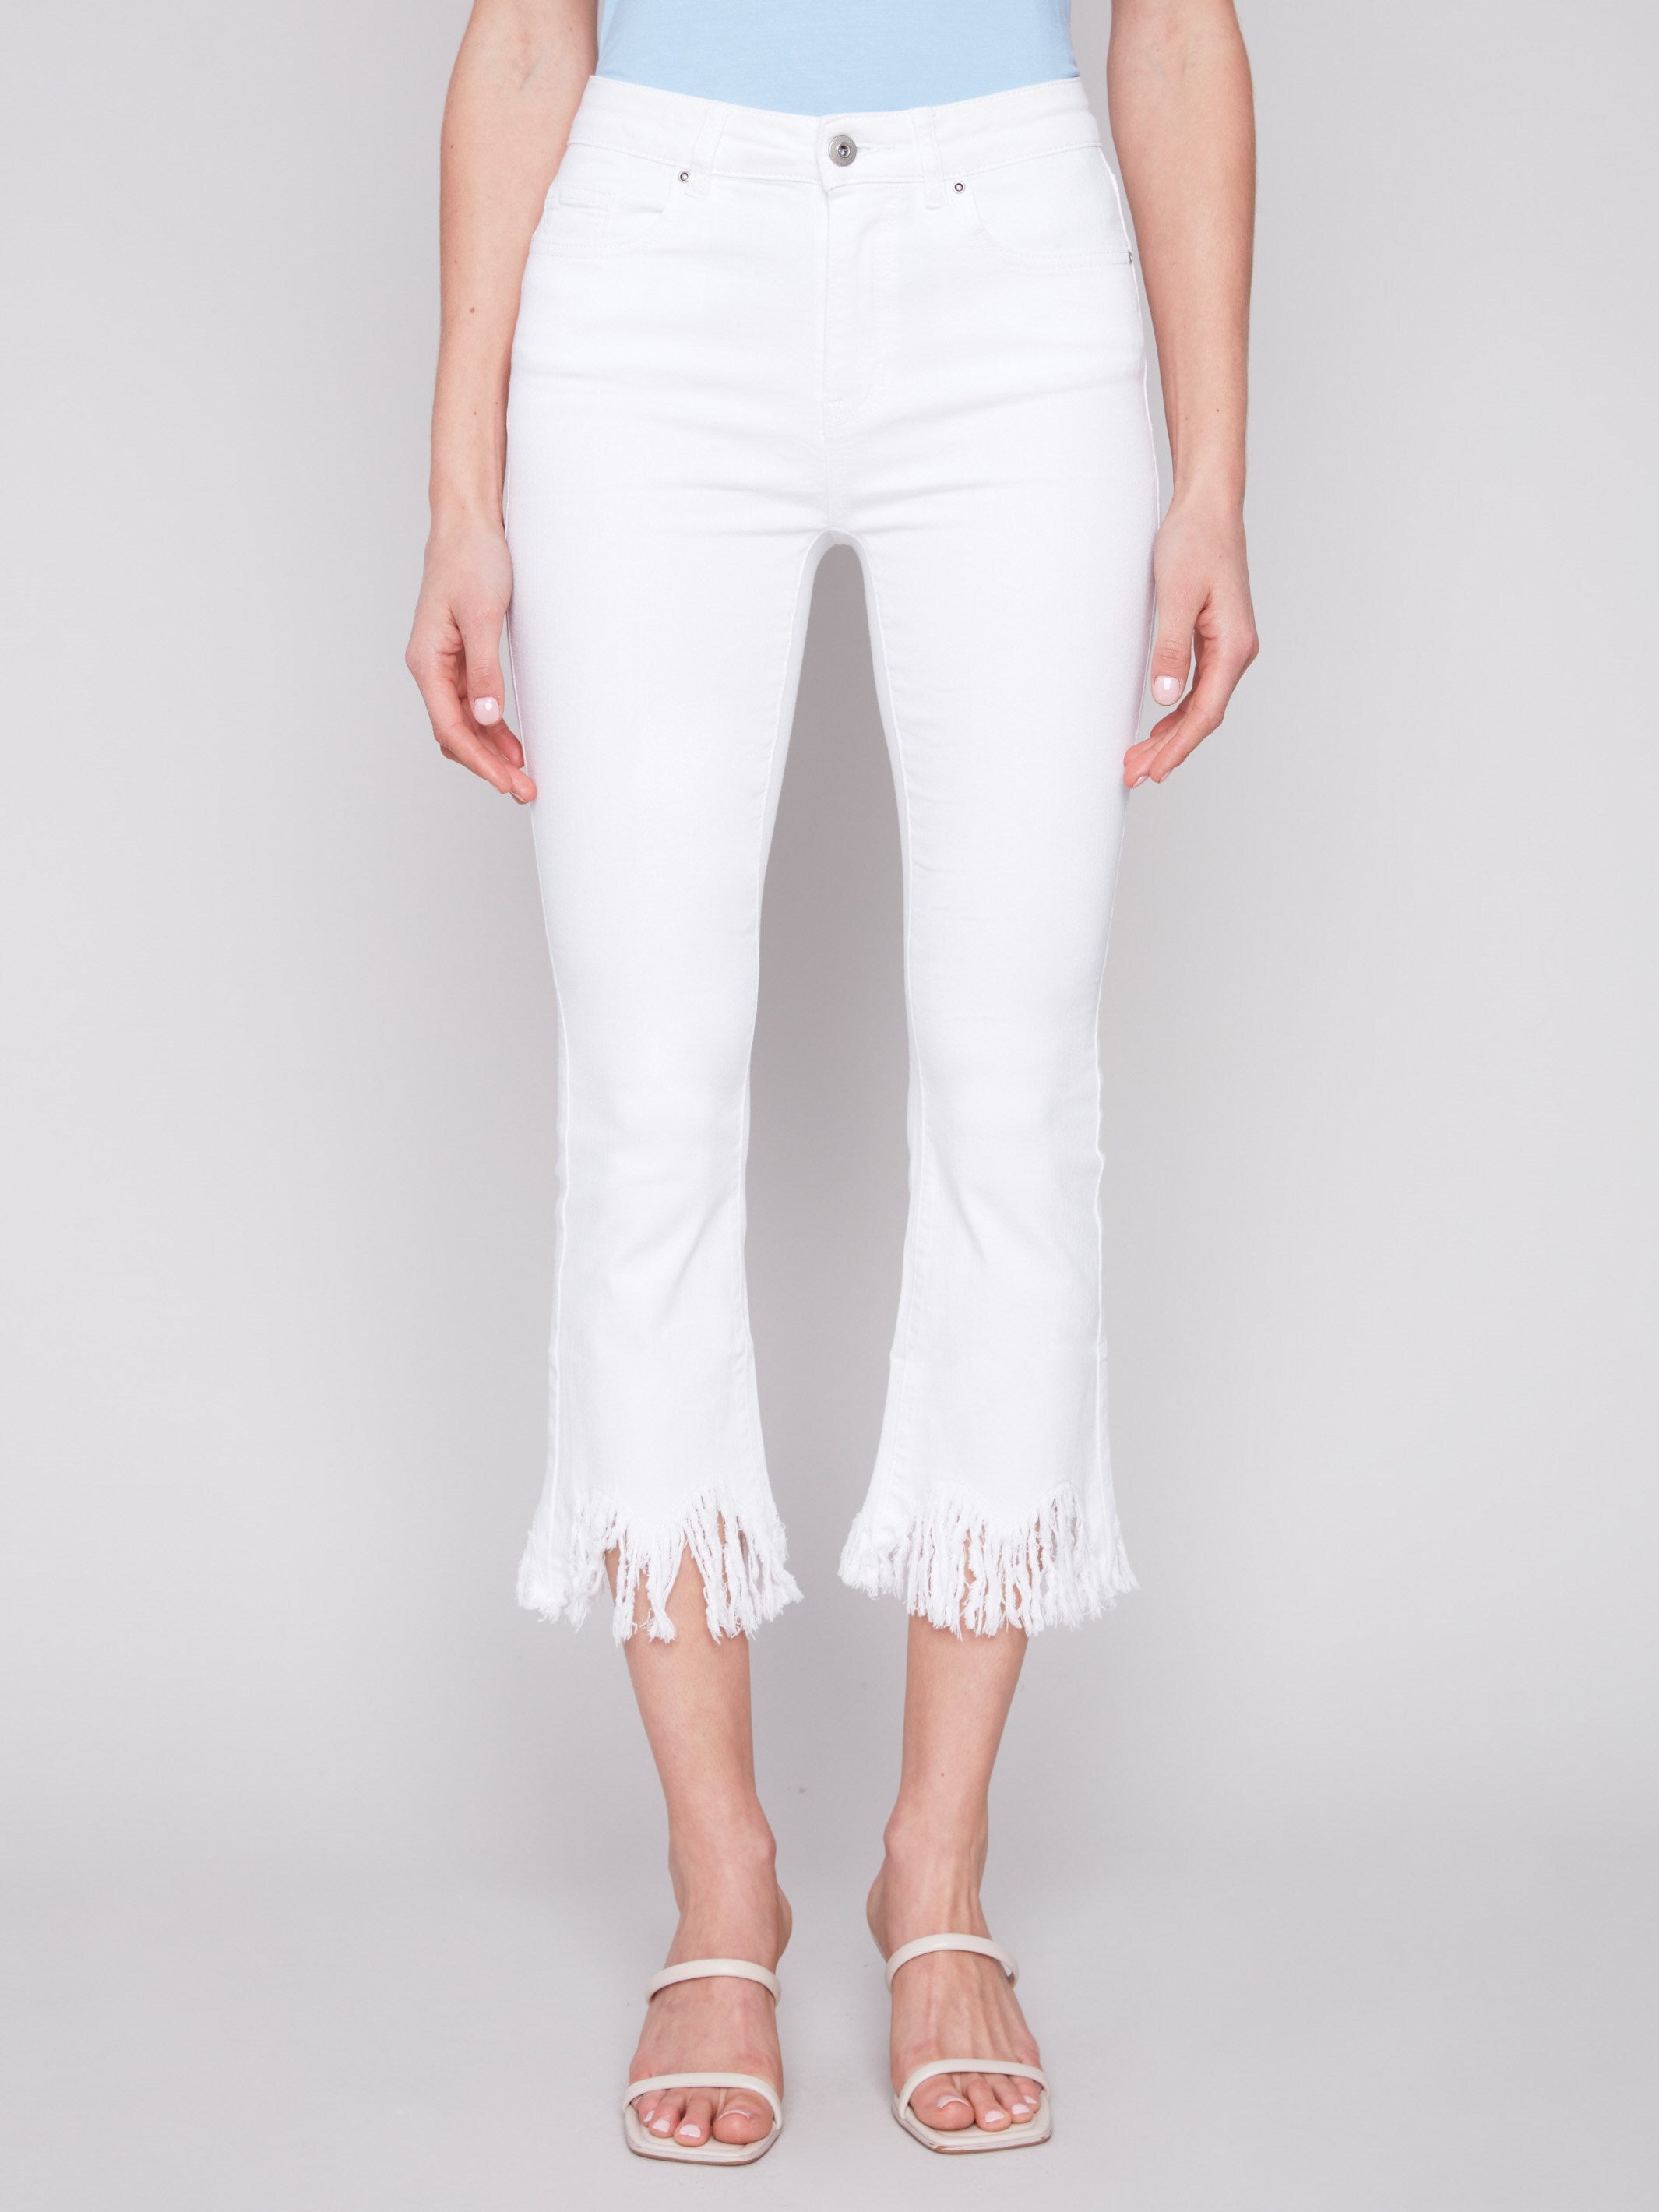 Charlie B Cropped Twill Jeans with Fringed Hem - White - Image 6